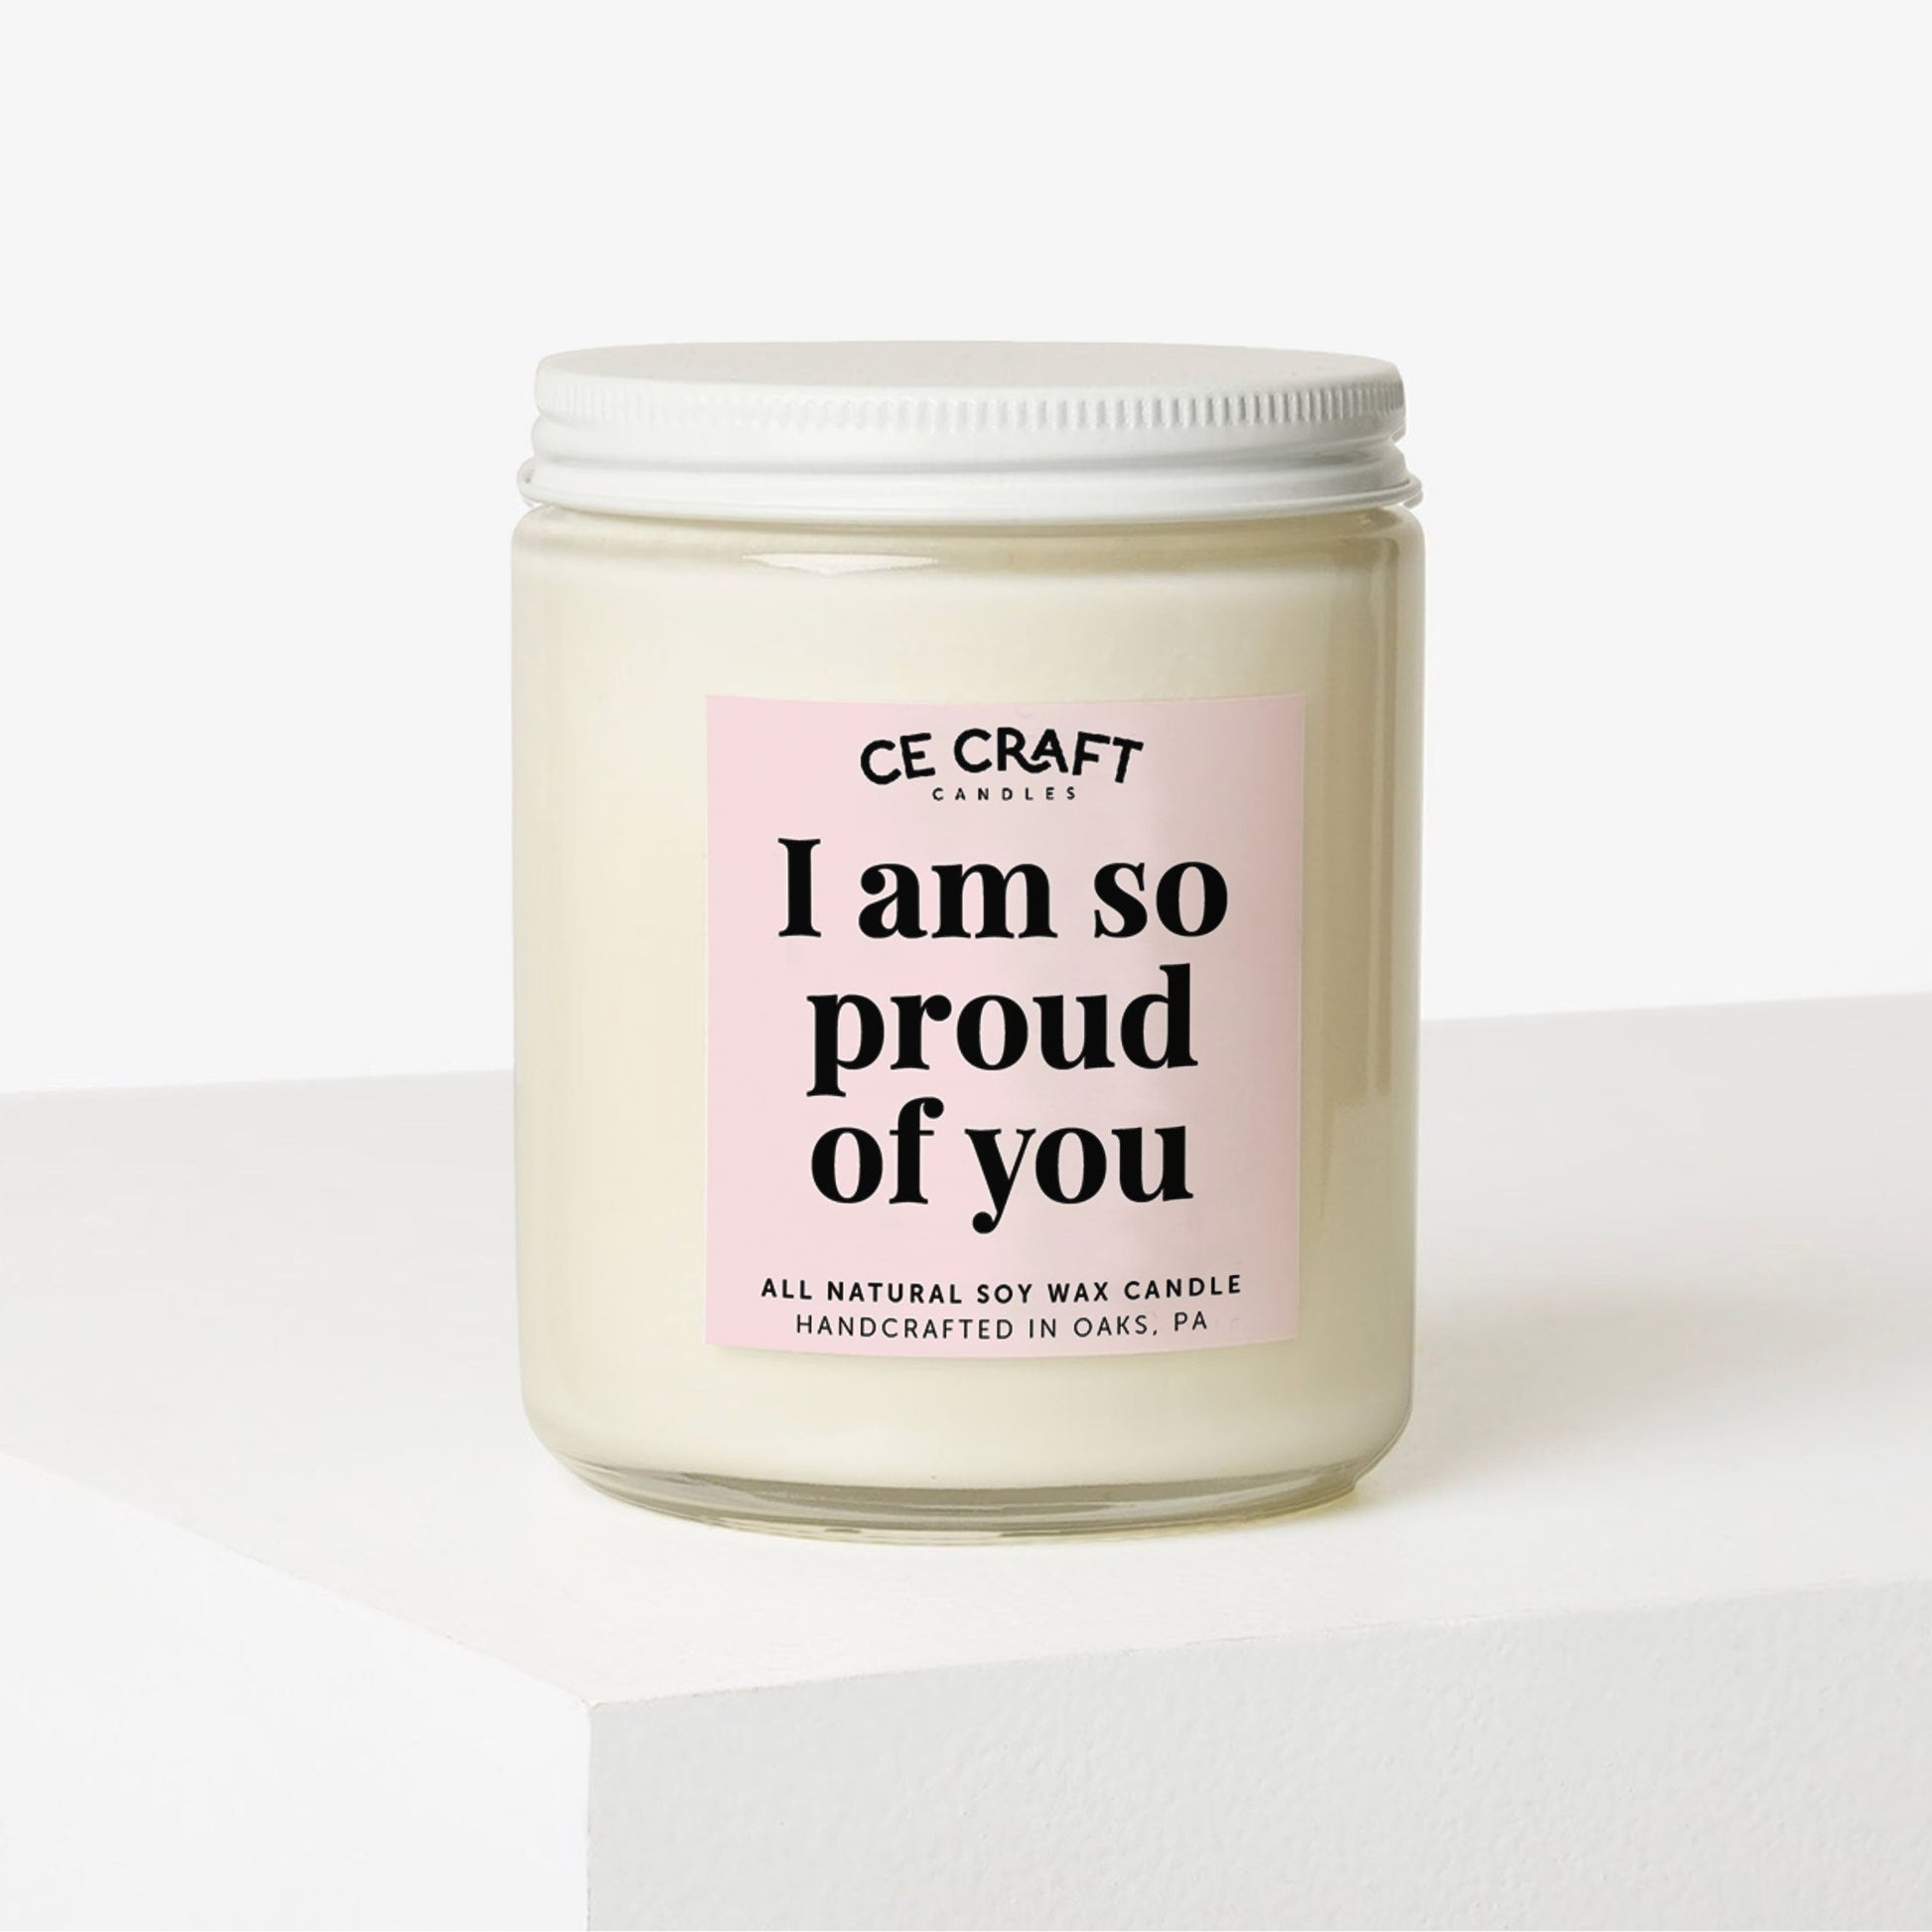 I Am So Proud of You Soy Wax Candle C & E Craft Co 